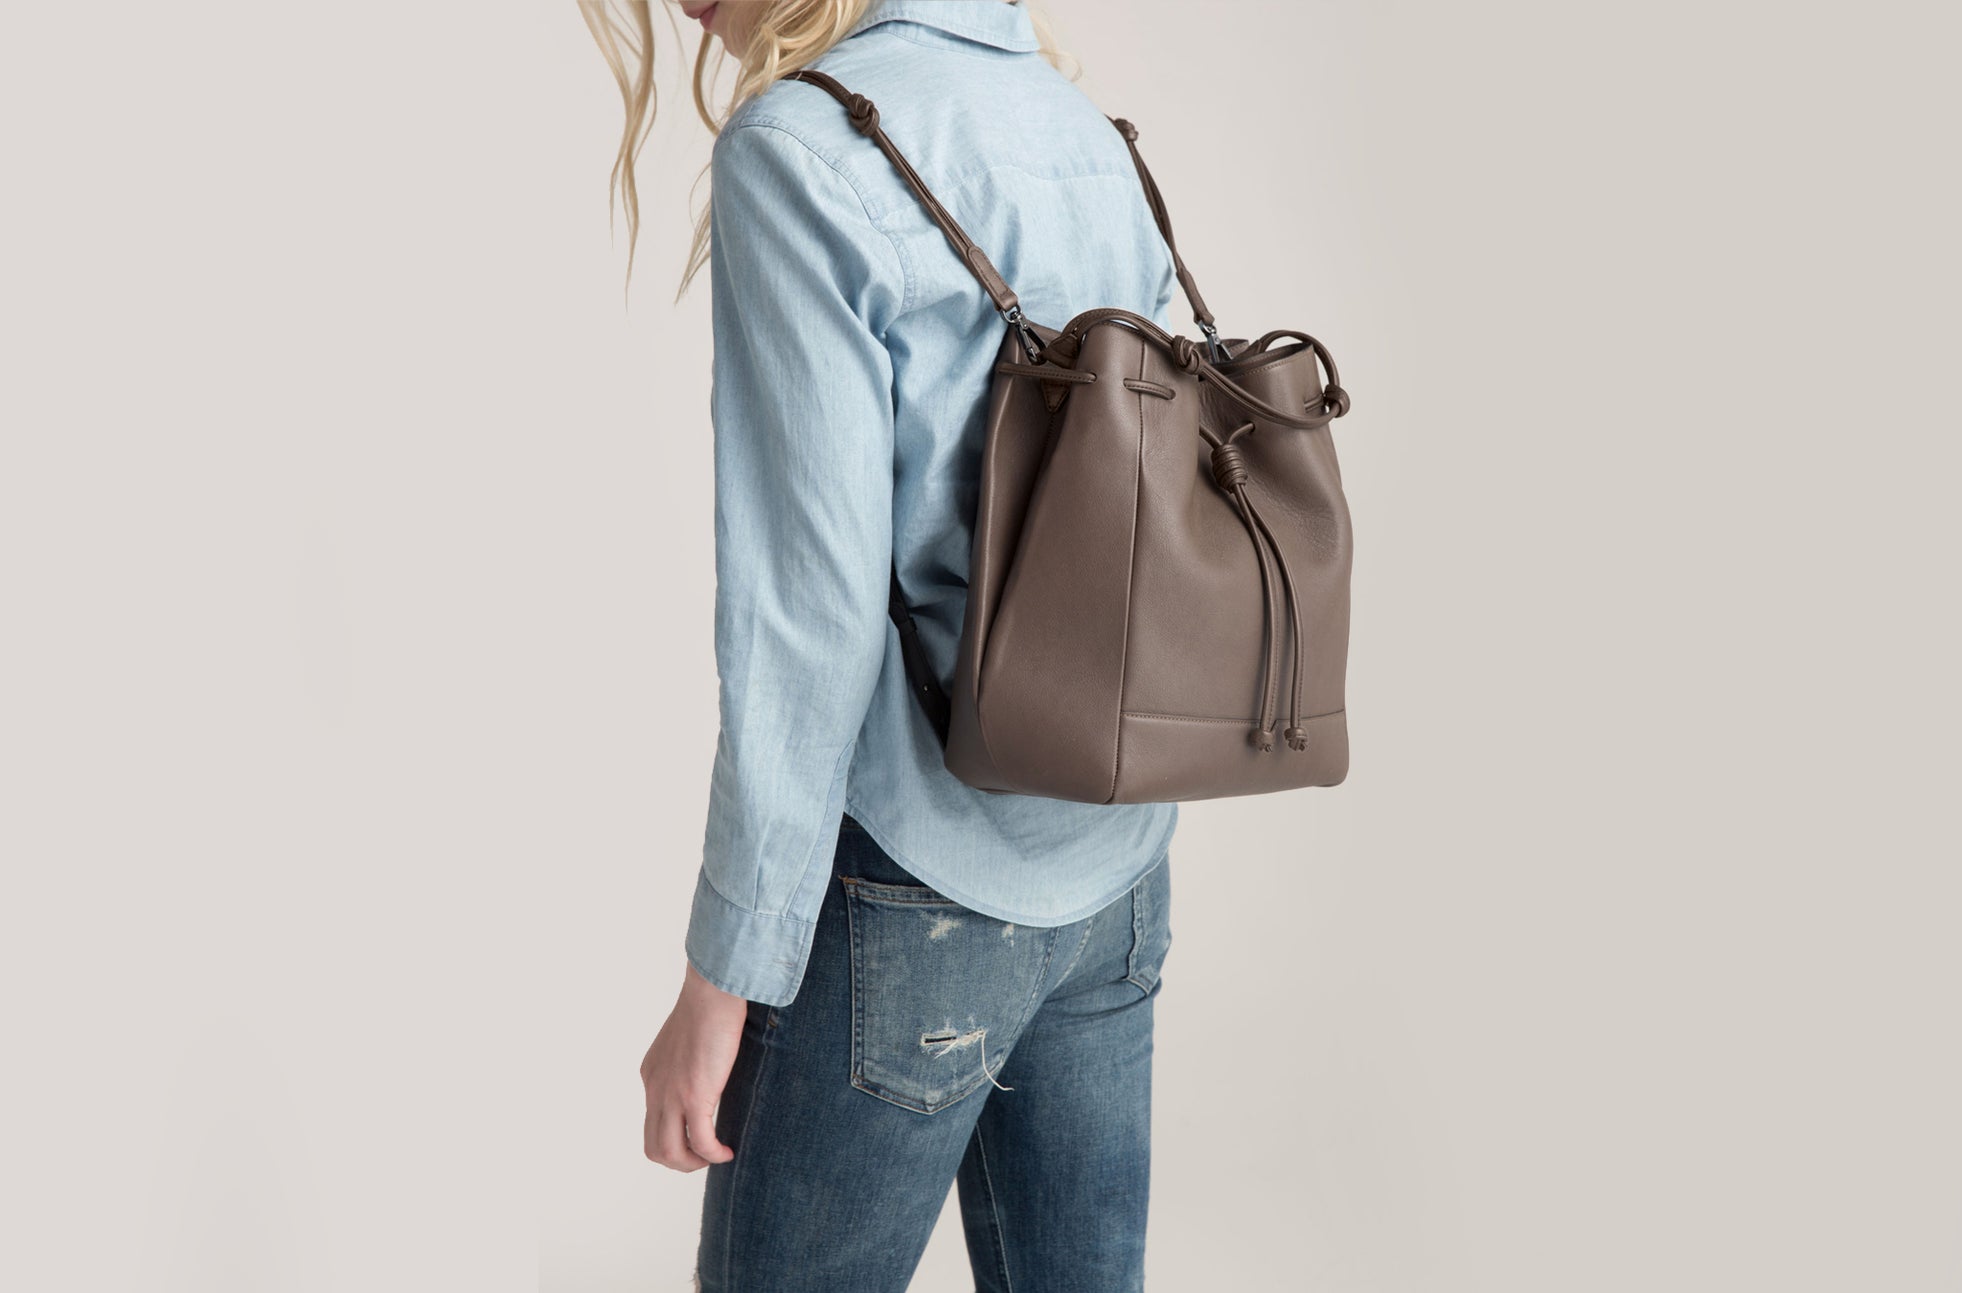 The Large Bucket Backpack - Sample Sale in Technik in Taupe image 2